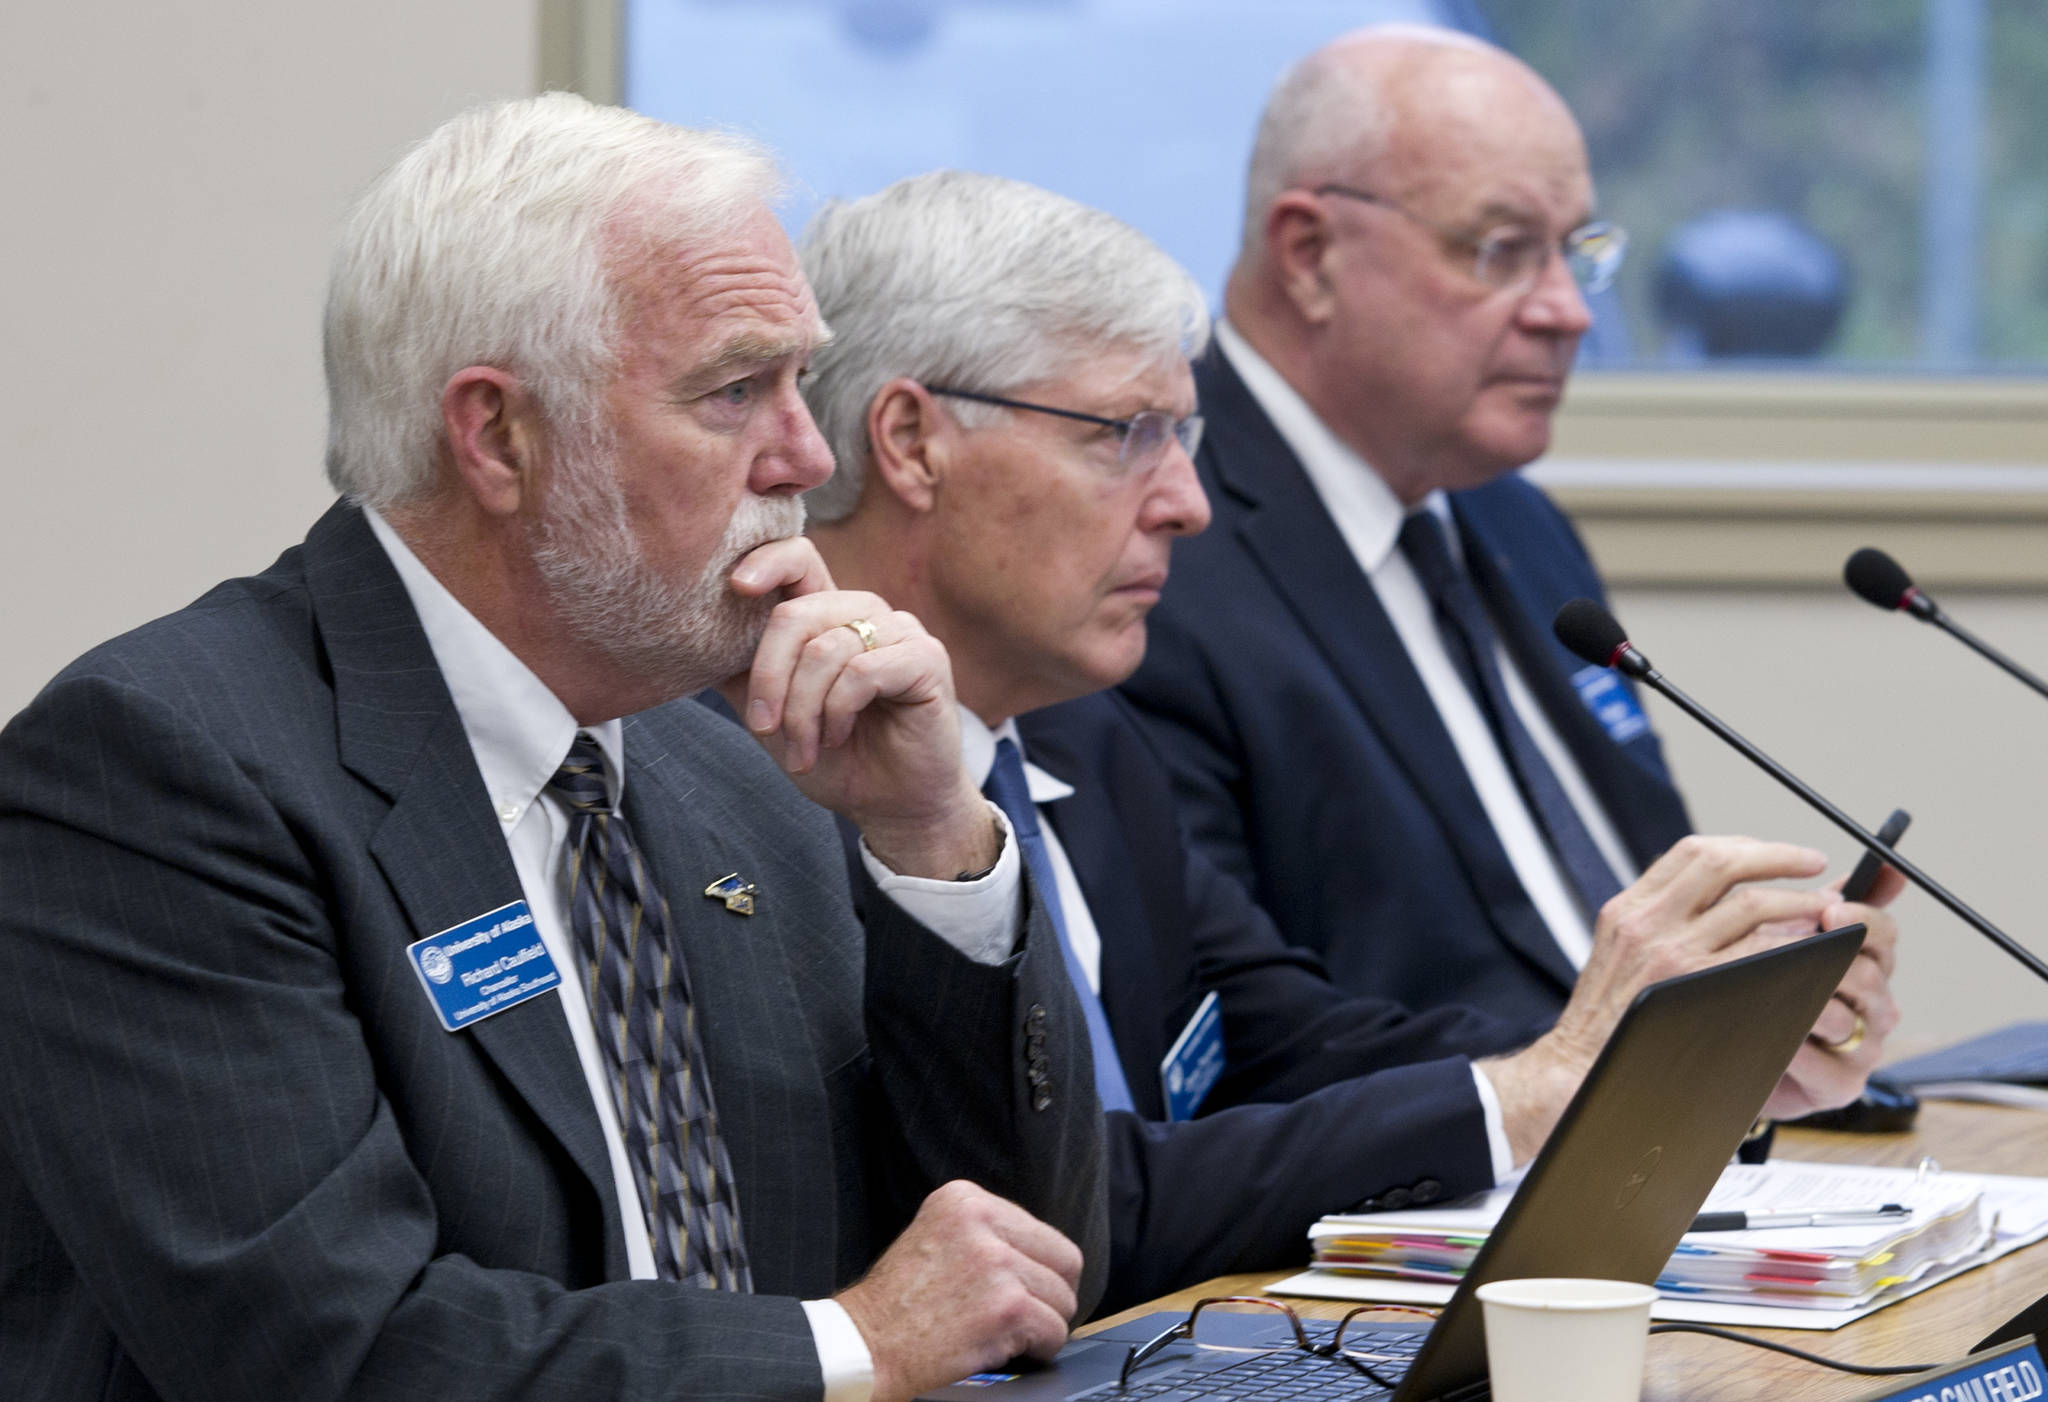 Empire Live: University of Alaska Board of Regents votes to delay tuition increase decision